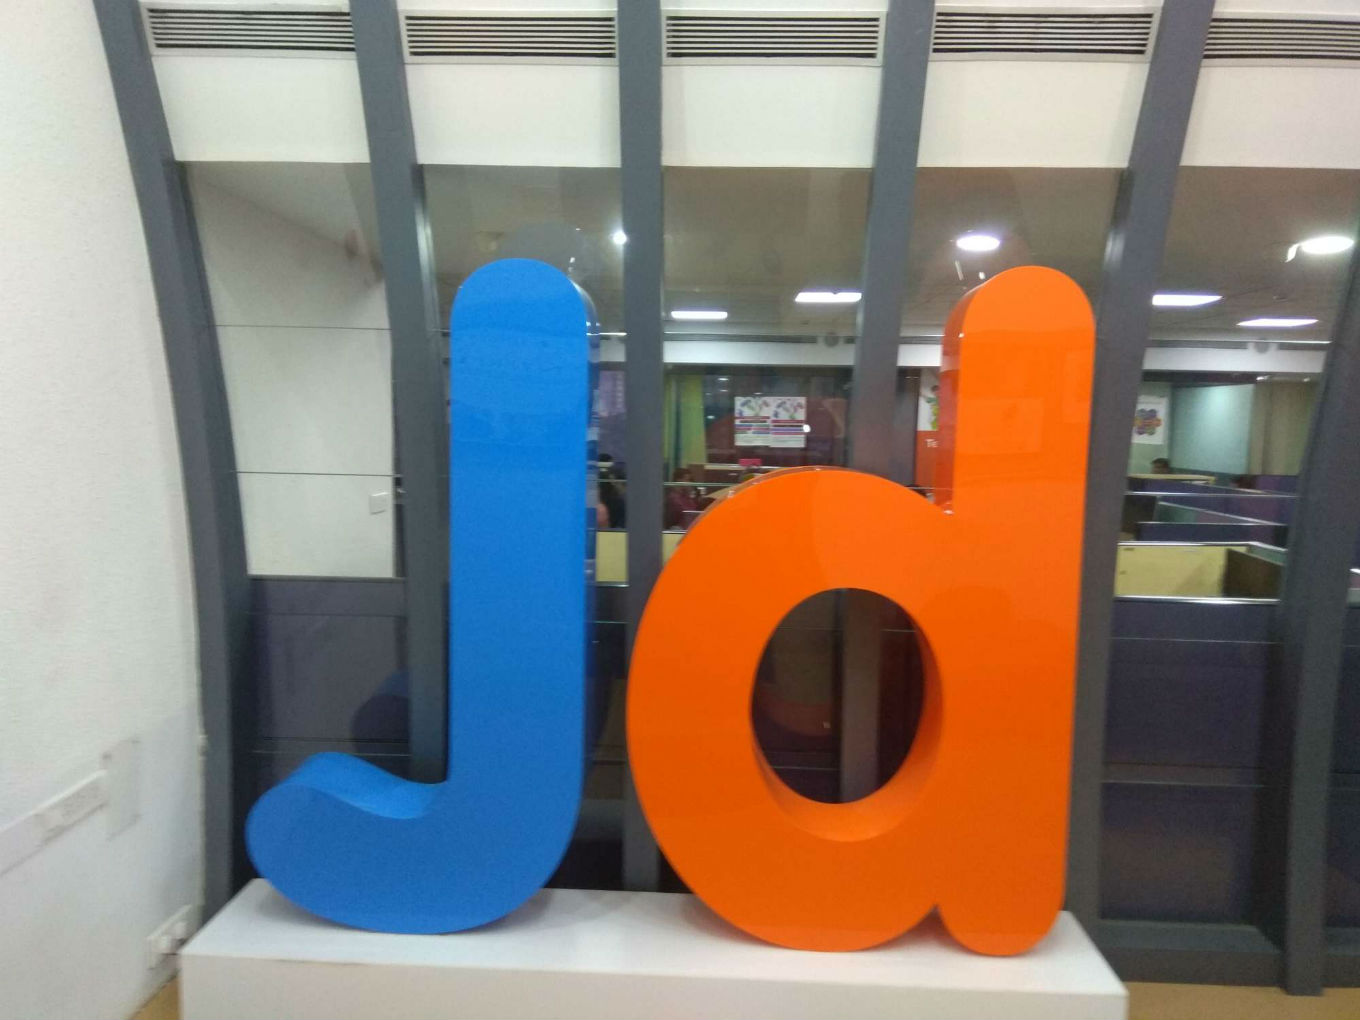 Justdial Sees 8.2% Jump In Profits In Q3 After Rise In Active Listings